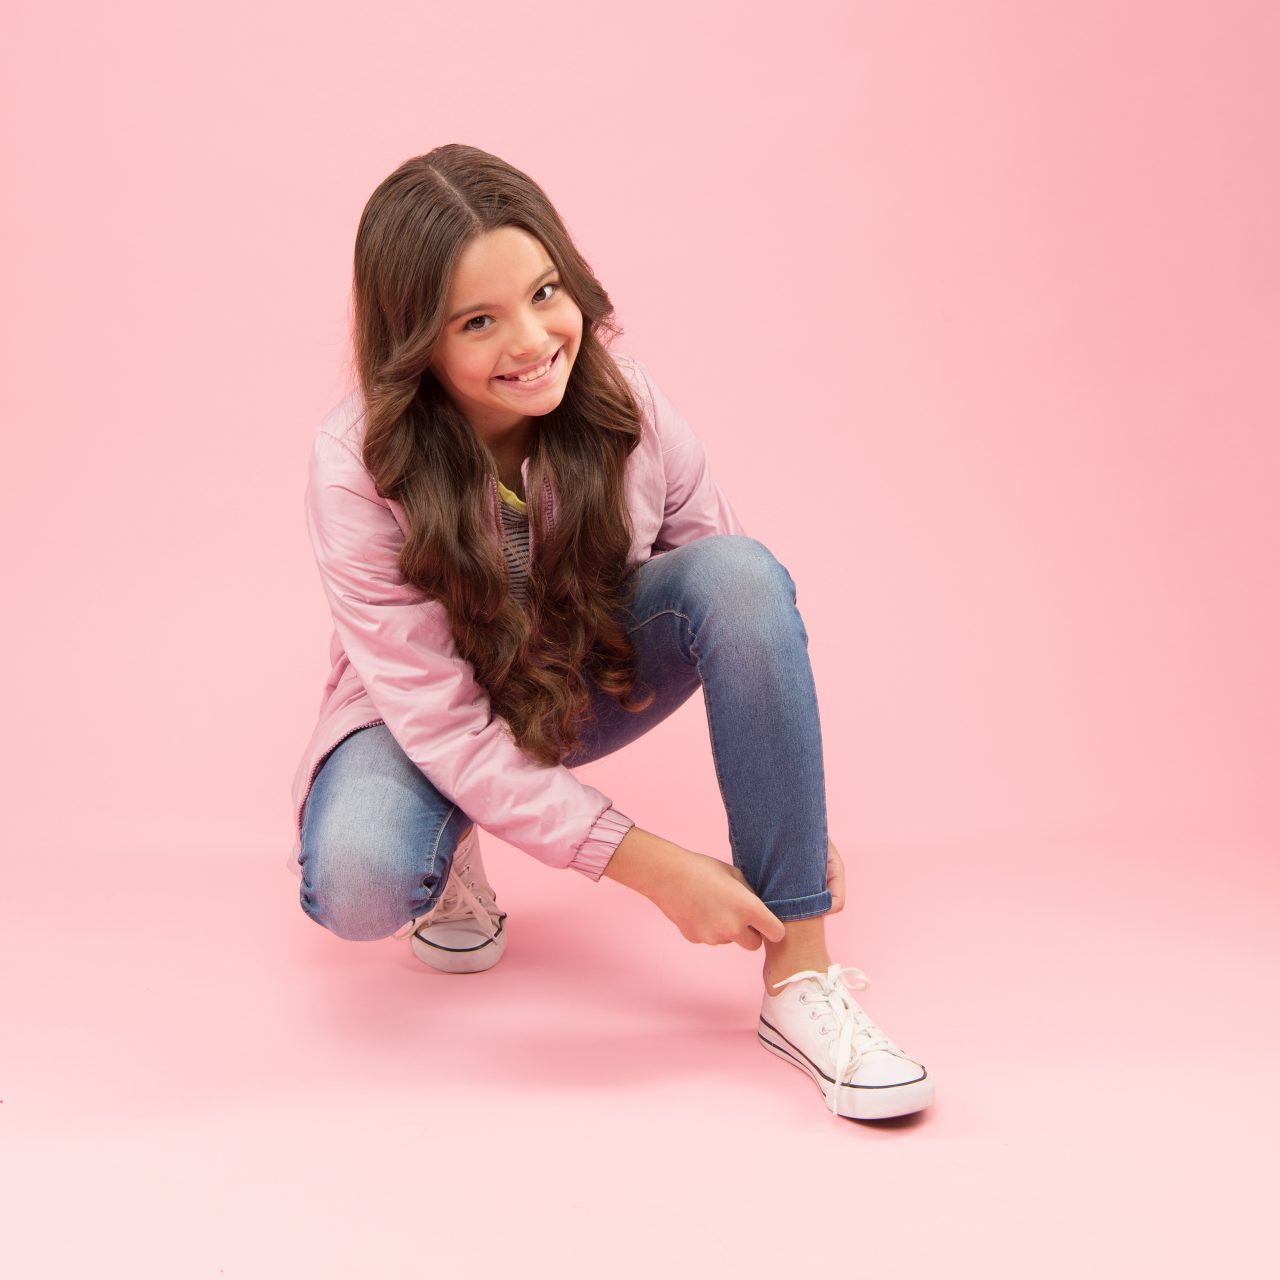 Adorable and stylish. Happy child fix jeans on pink background. Beauty look of little girl child. Fashion child smile in casual style. Cute small child smiling with long curly hair.